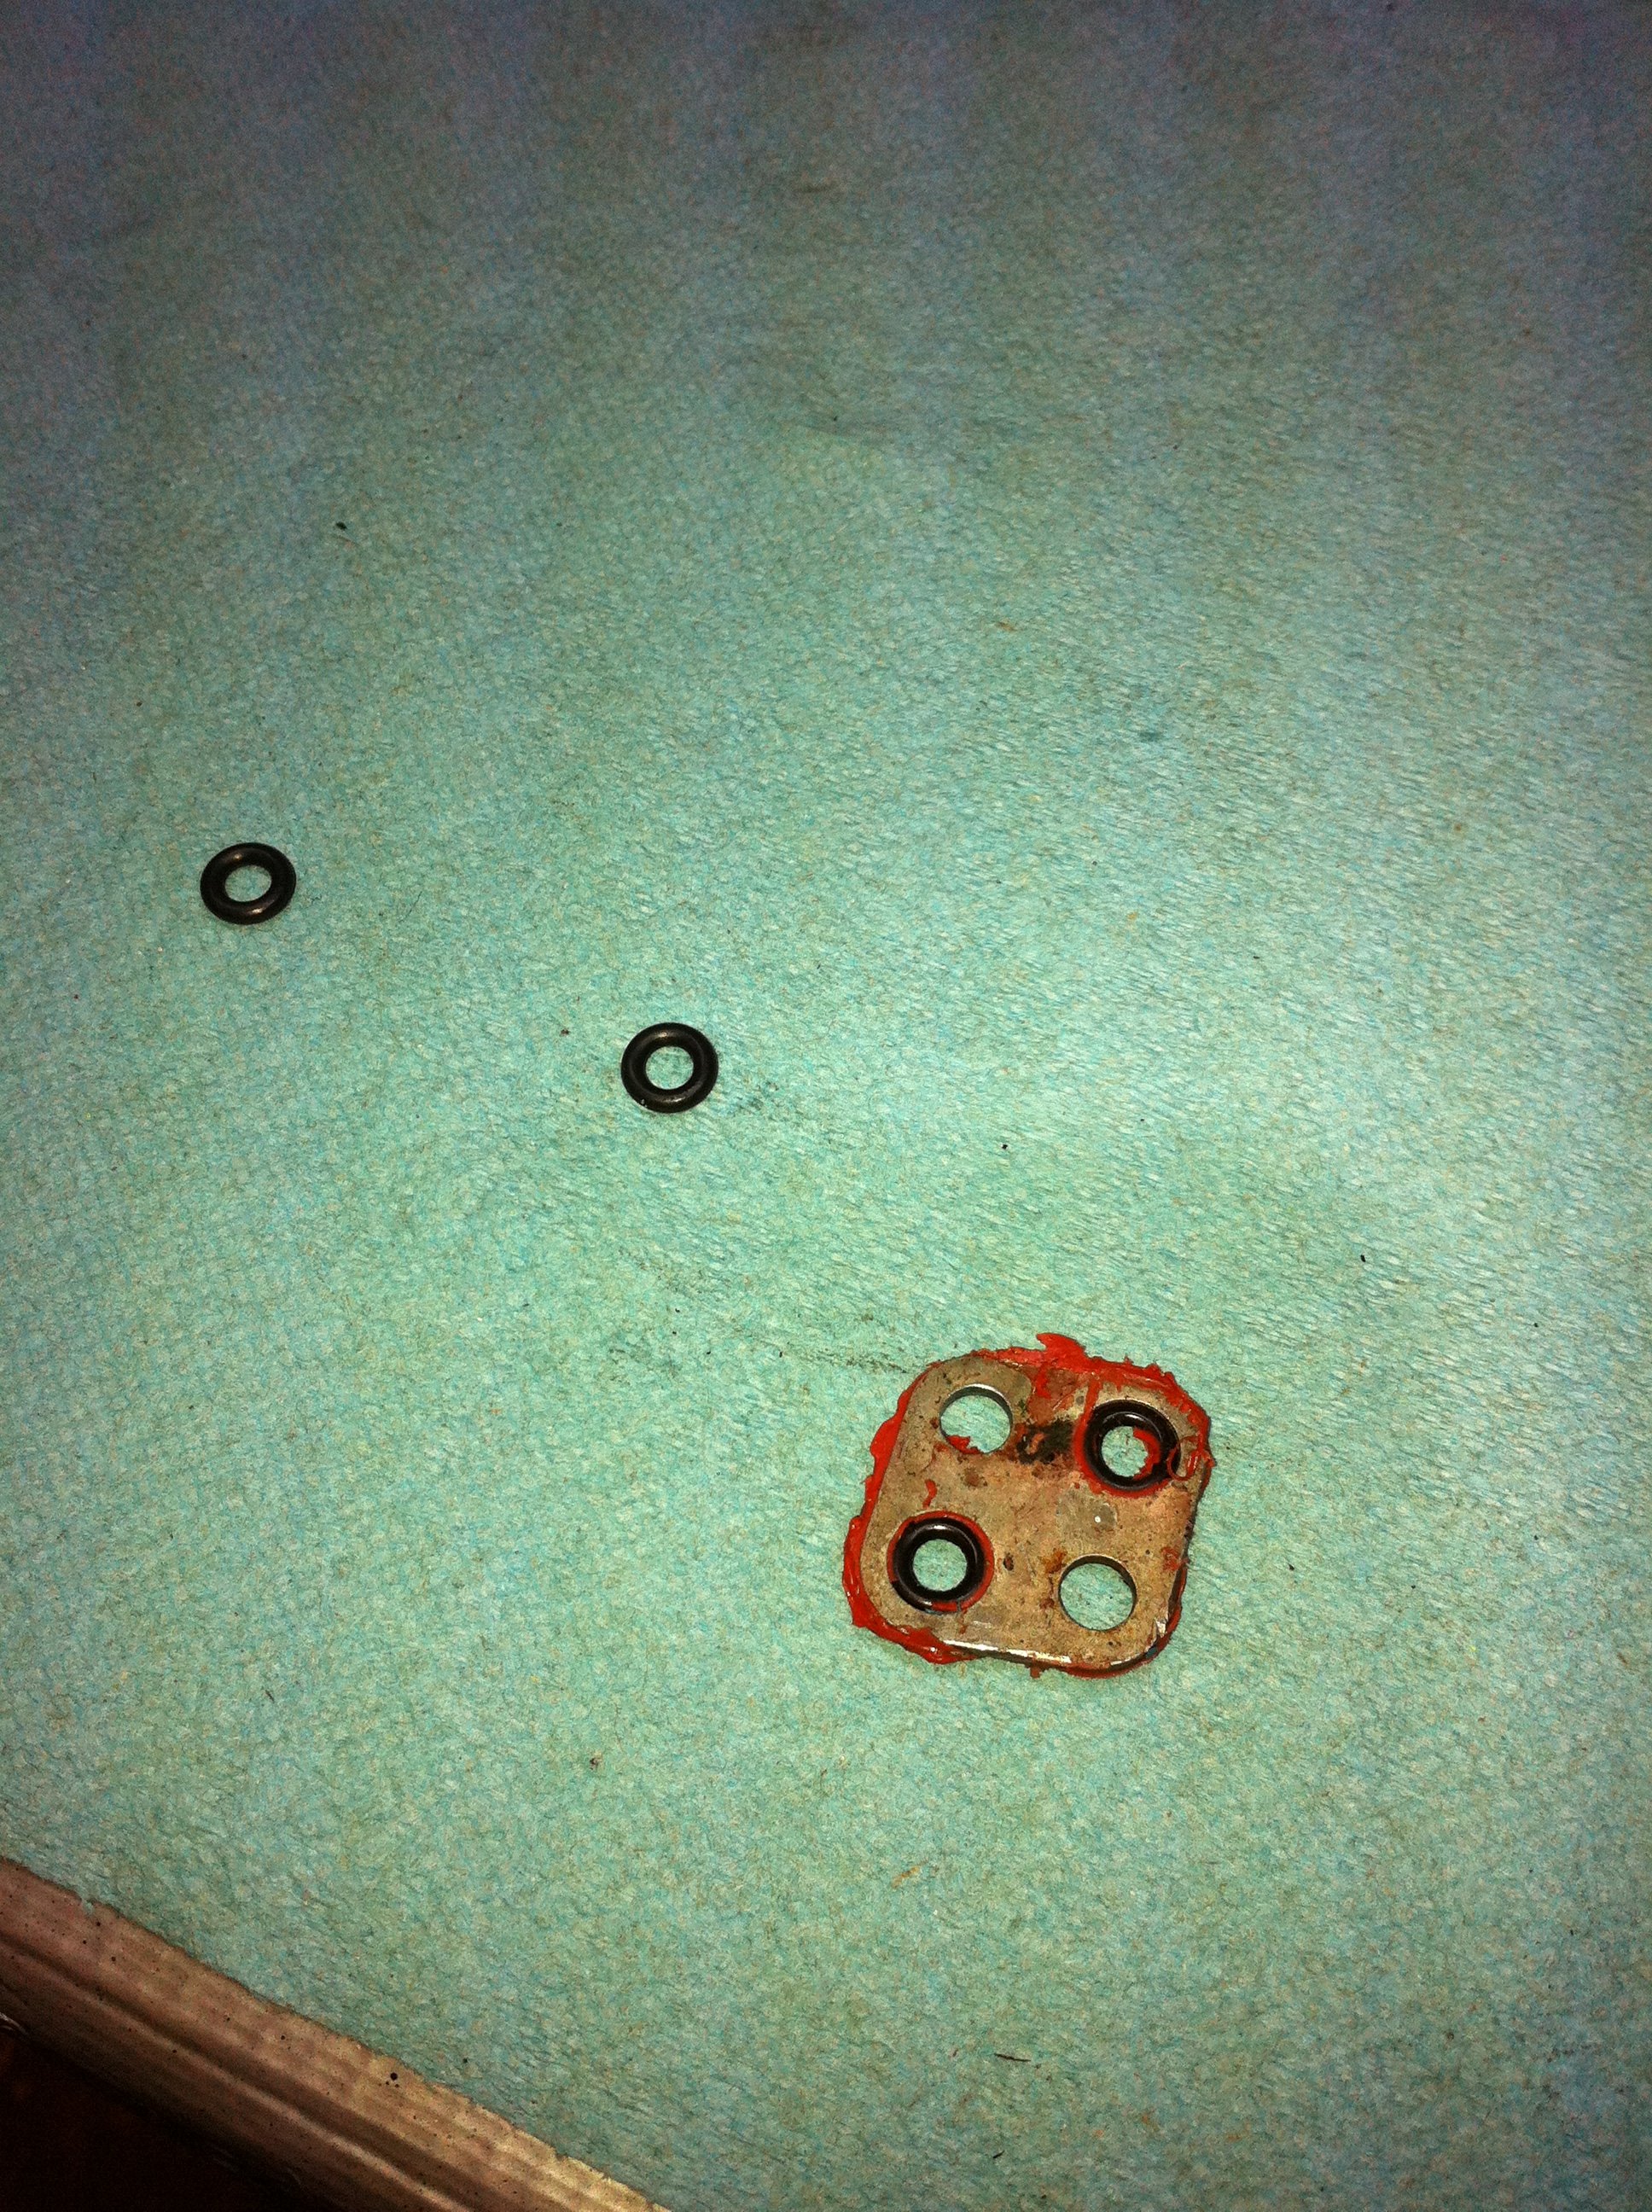 Steering rack o-rings had red RTV goop slathered on them, plugging one of the holes in the rack